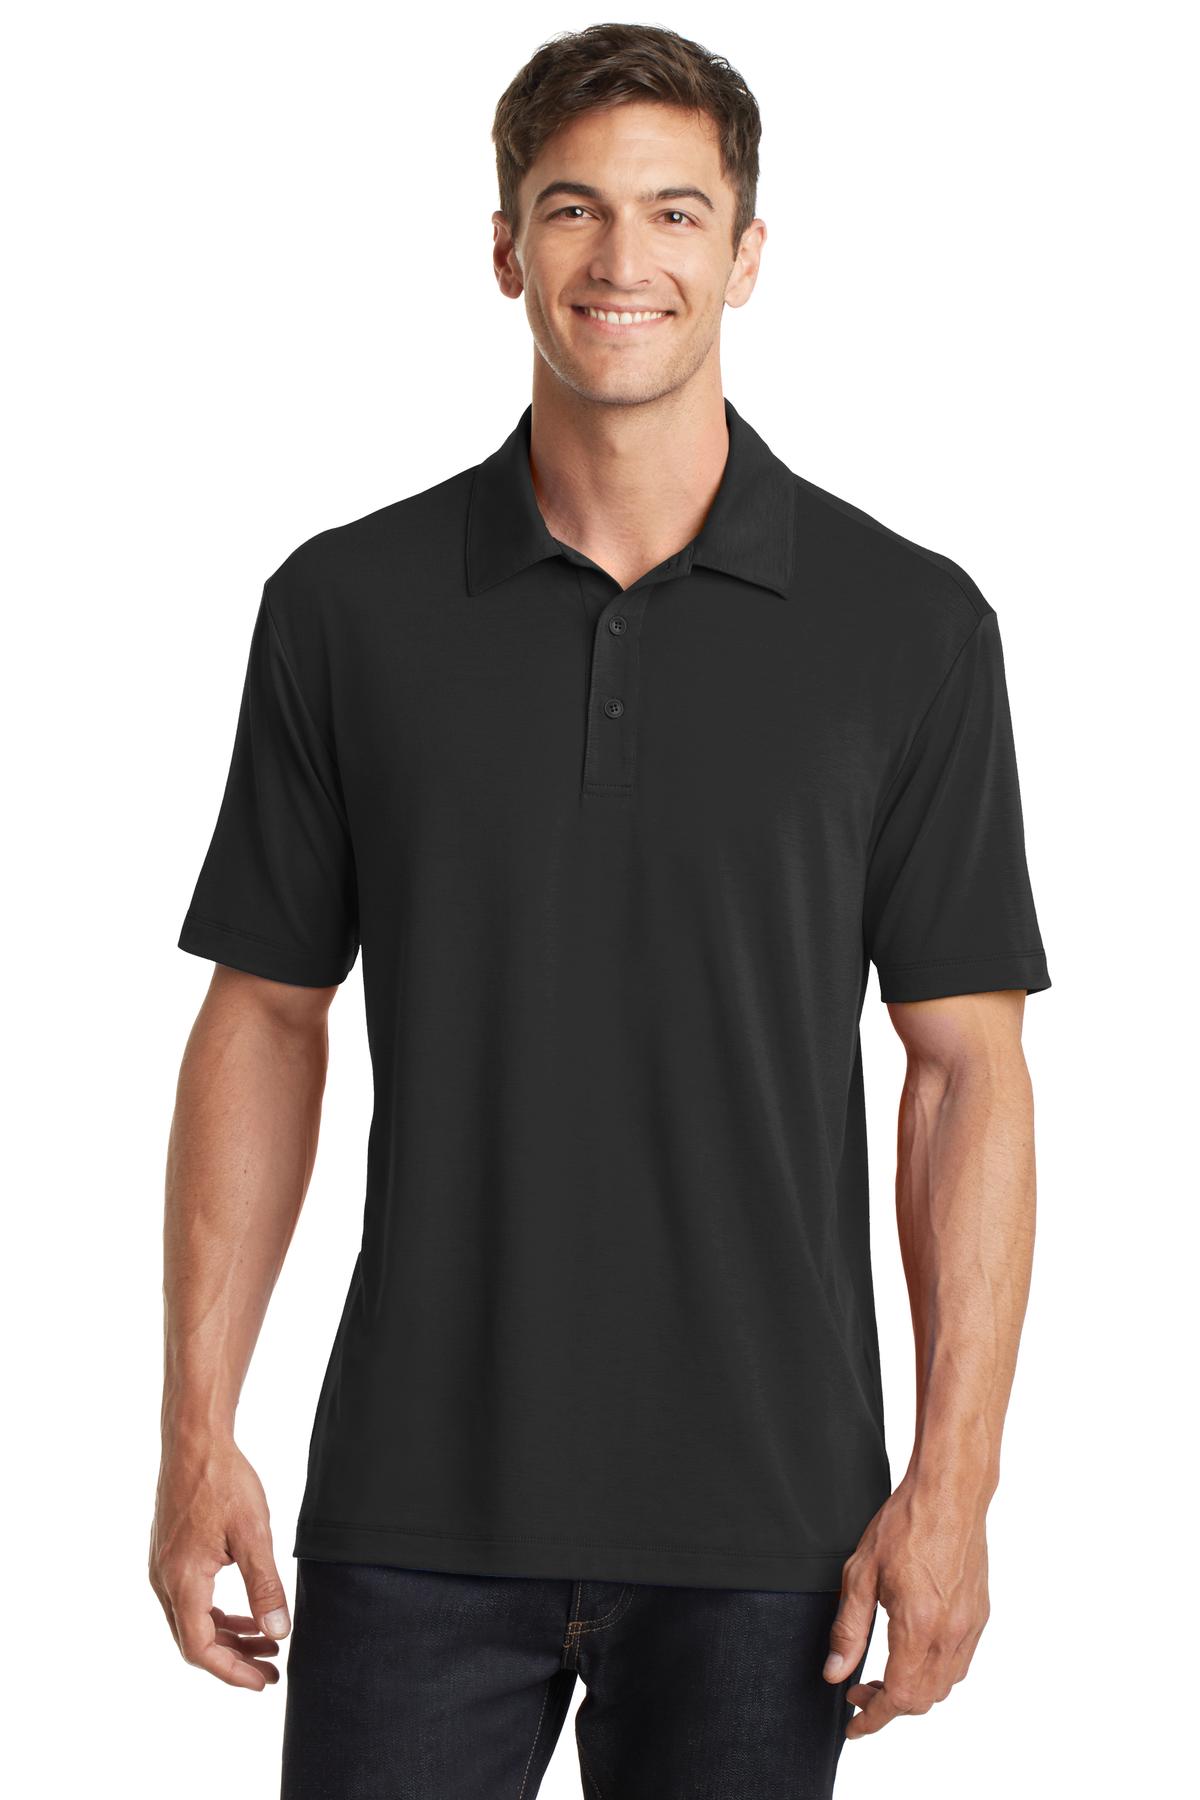 Port Authority Cotton Touch Performance Polo-Port Authority